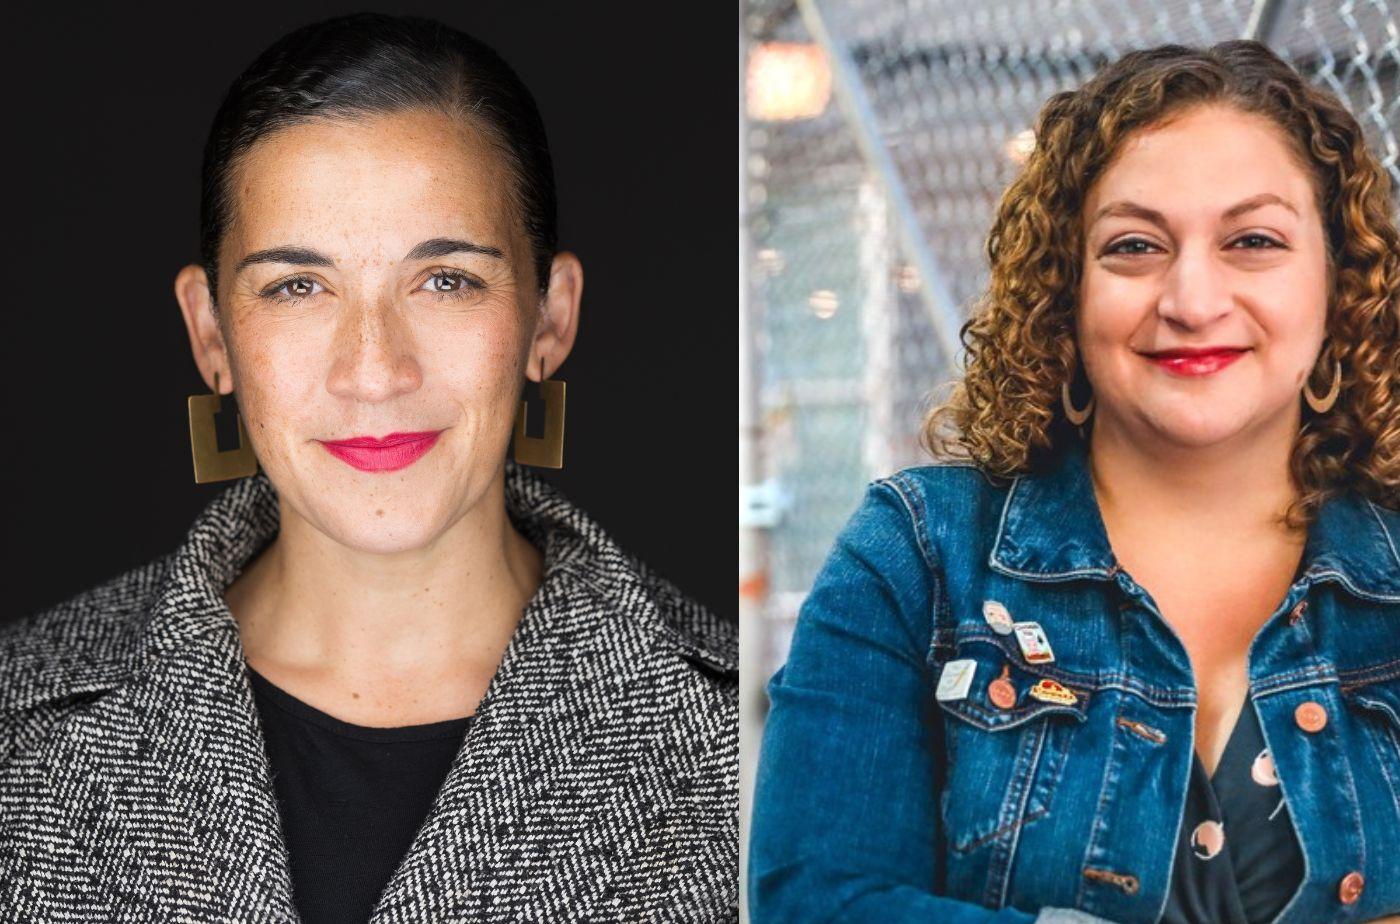 Two New Artistic Directors on Their Vision for the Future of Theater